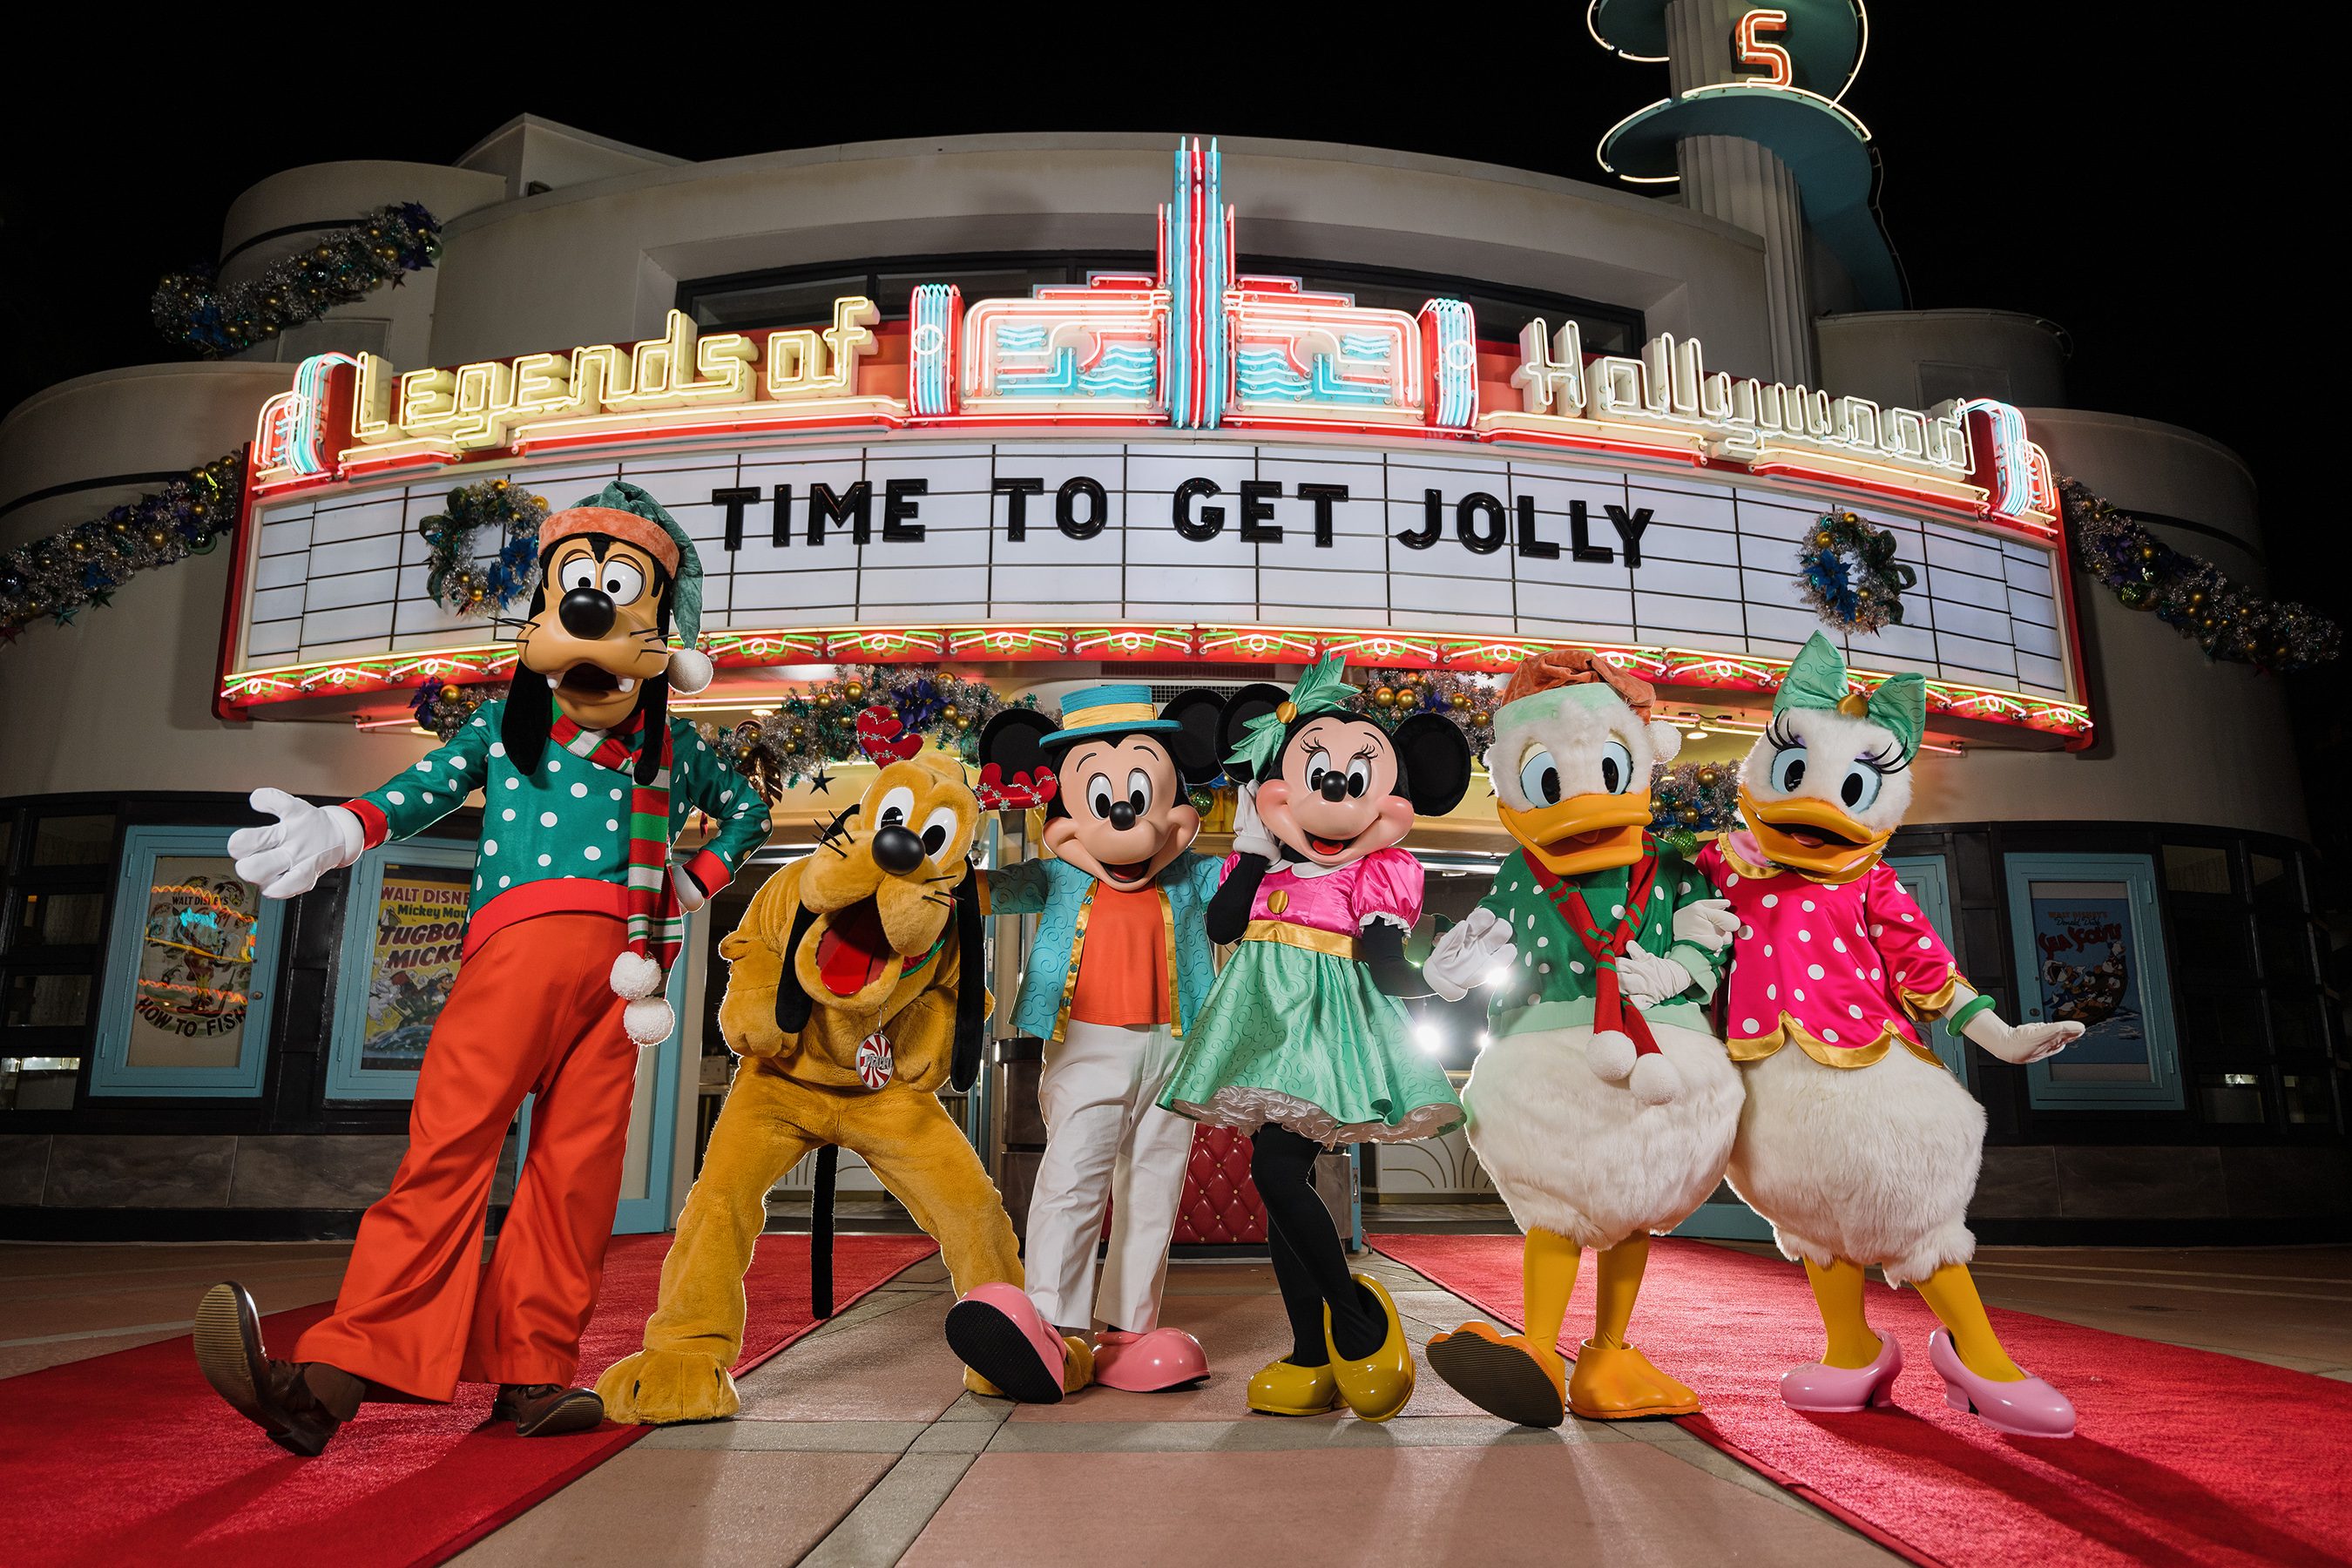 Festive holiday character outfits, experiences coming to Walt Disney World